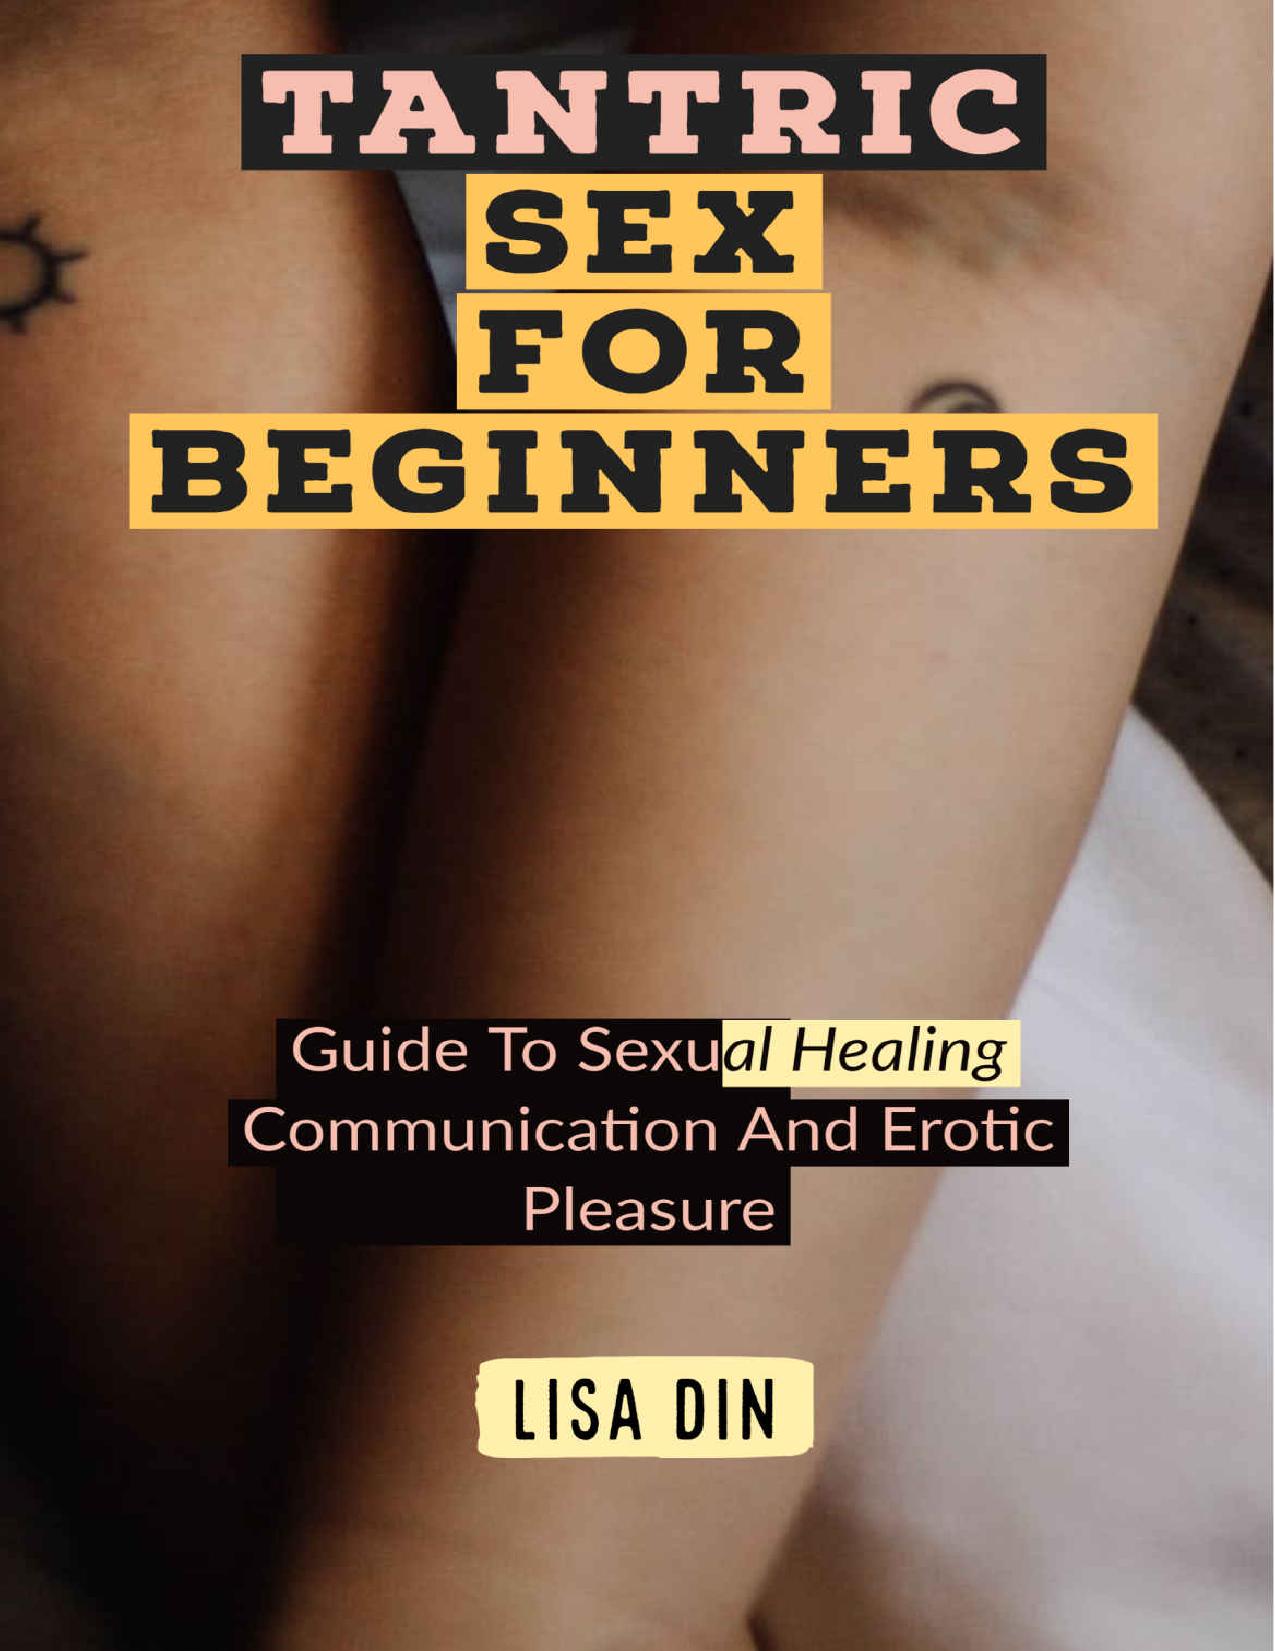 Tantric sex for Beginners: Guide To Sexual Healing Communication And Erotic Pleasure by Lisa Din